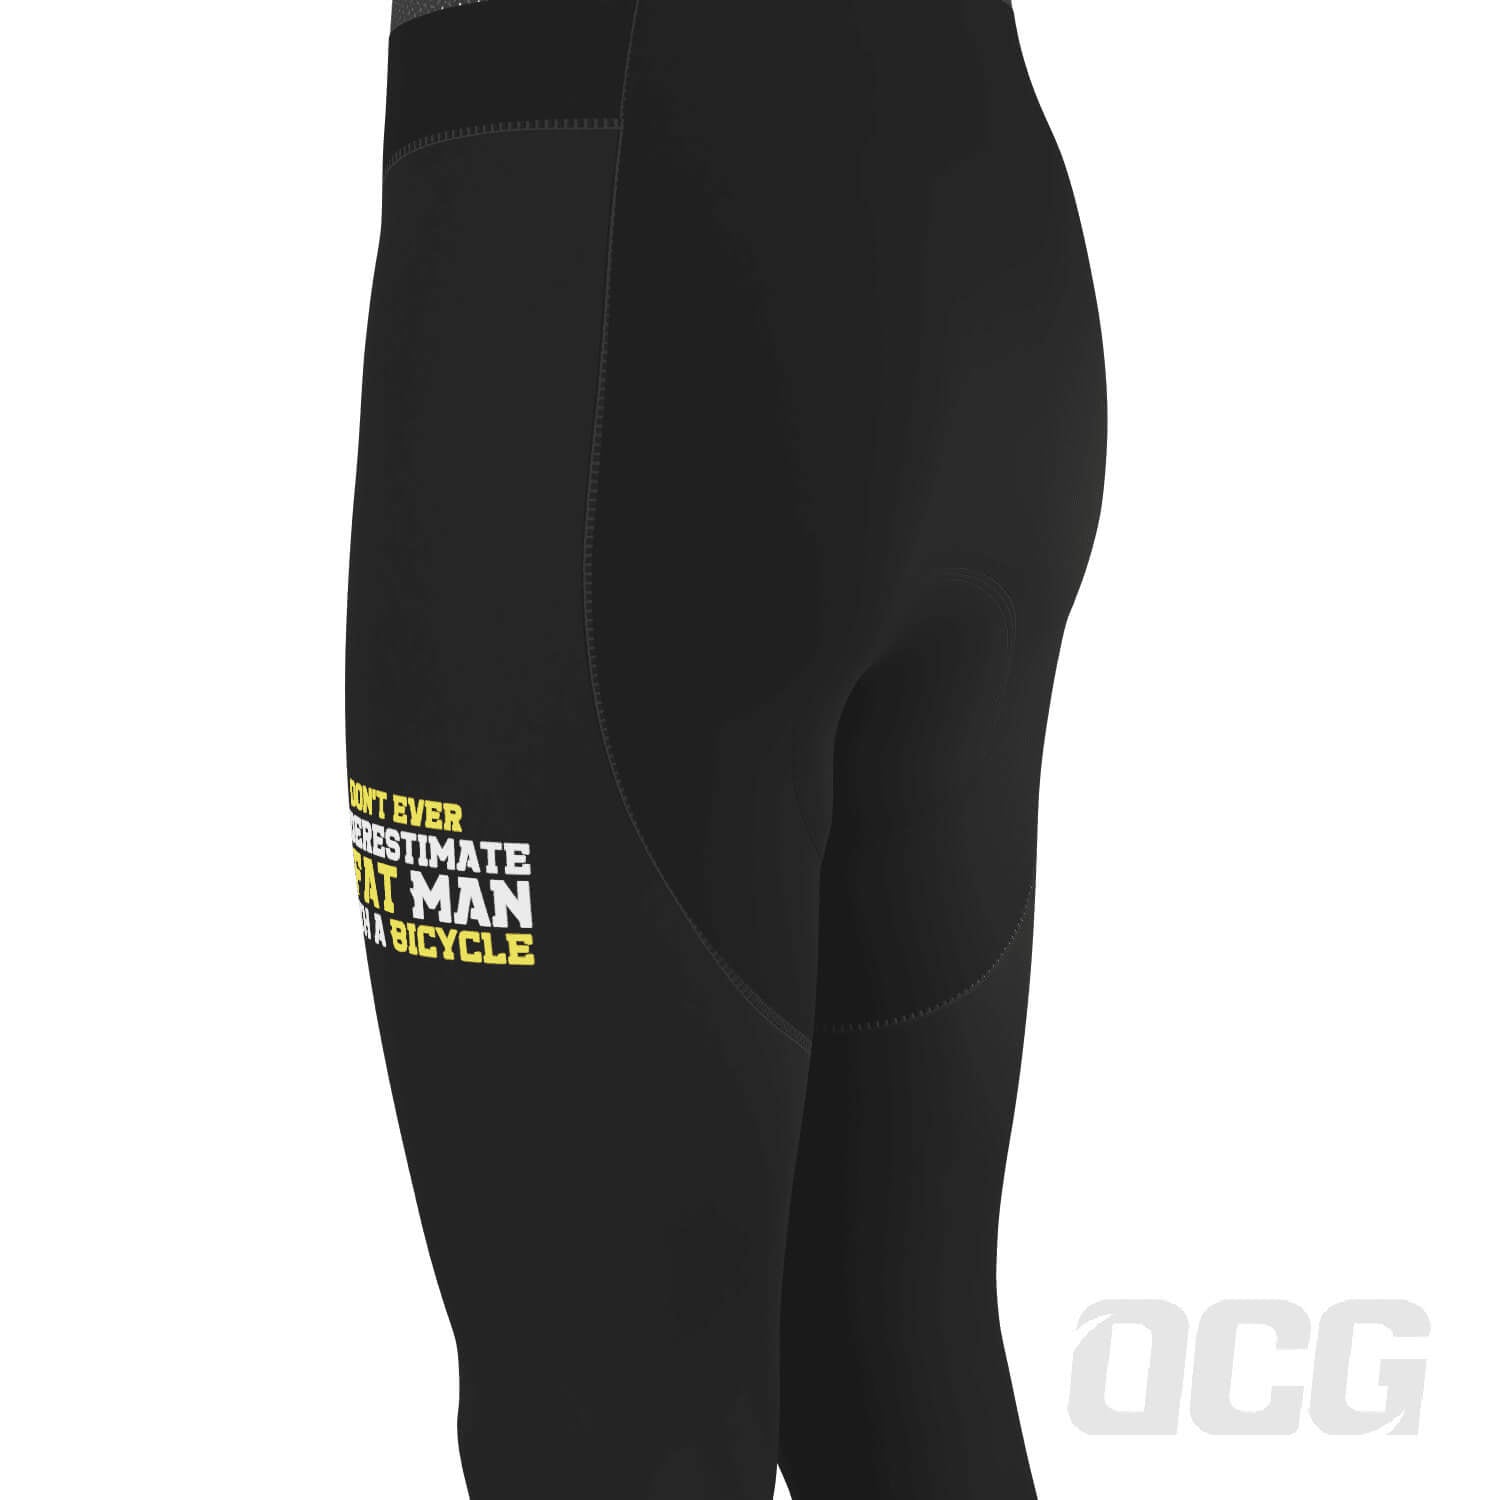 Men's Don't Ever Underestimate a Fat Man Gel Padded Cycling Bib-Tights